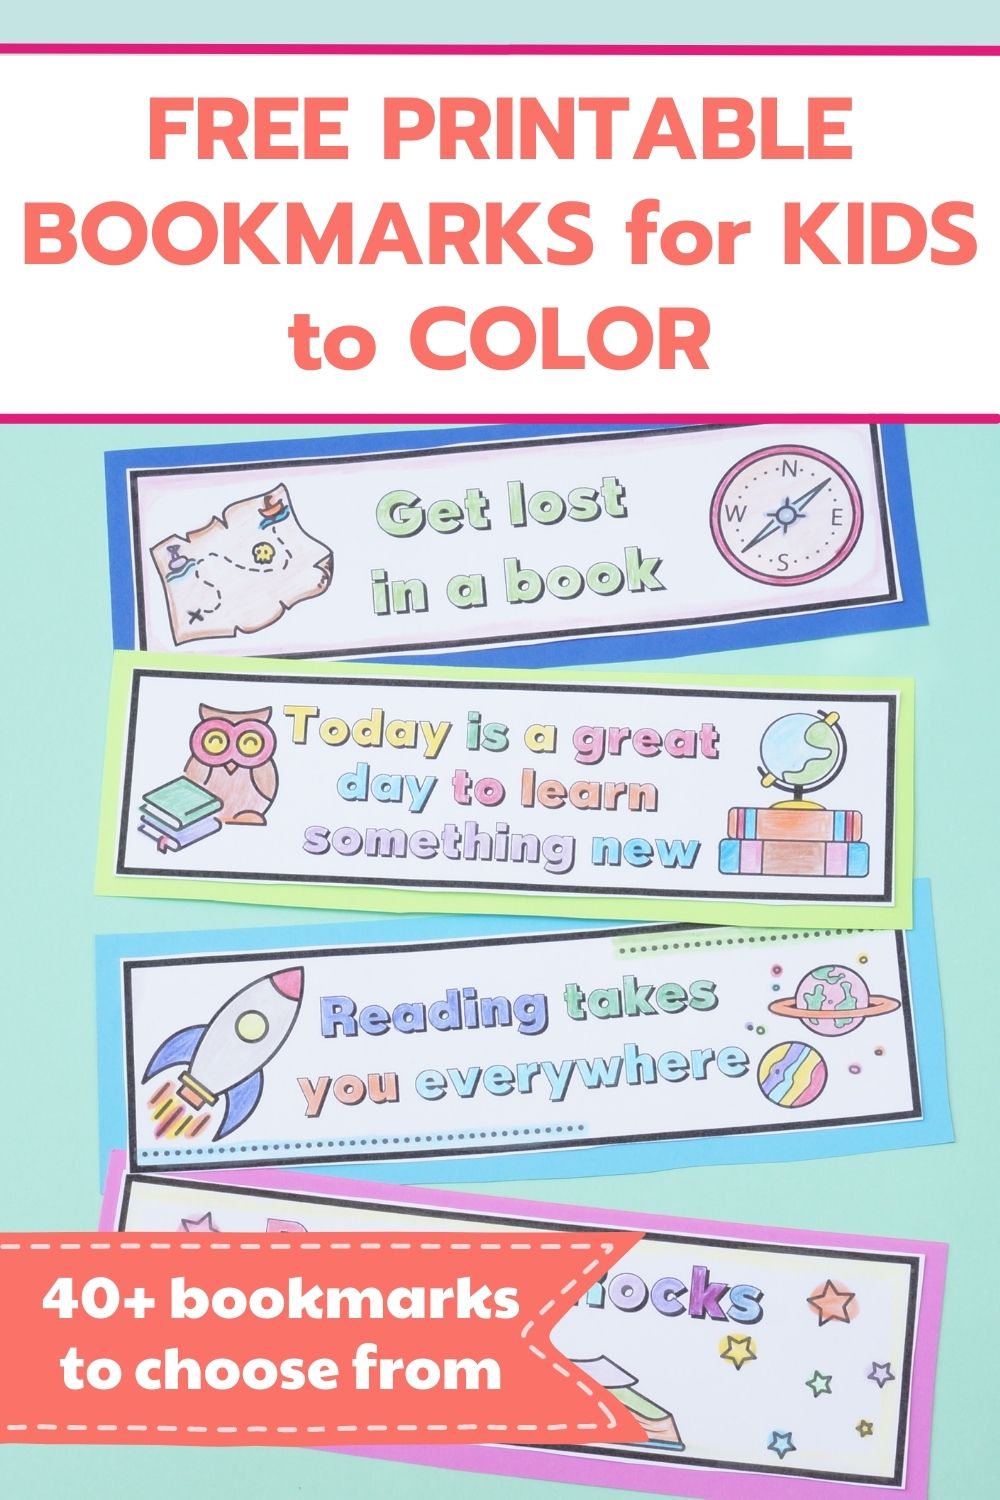 free printable bookmarks to color for kids title and 4 bookmarks printed out